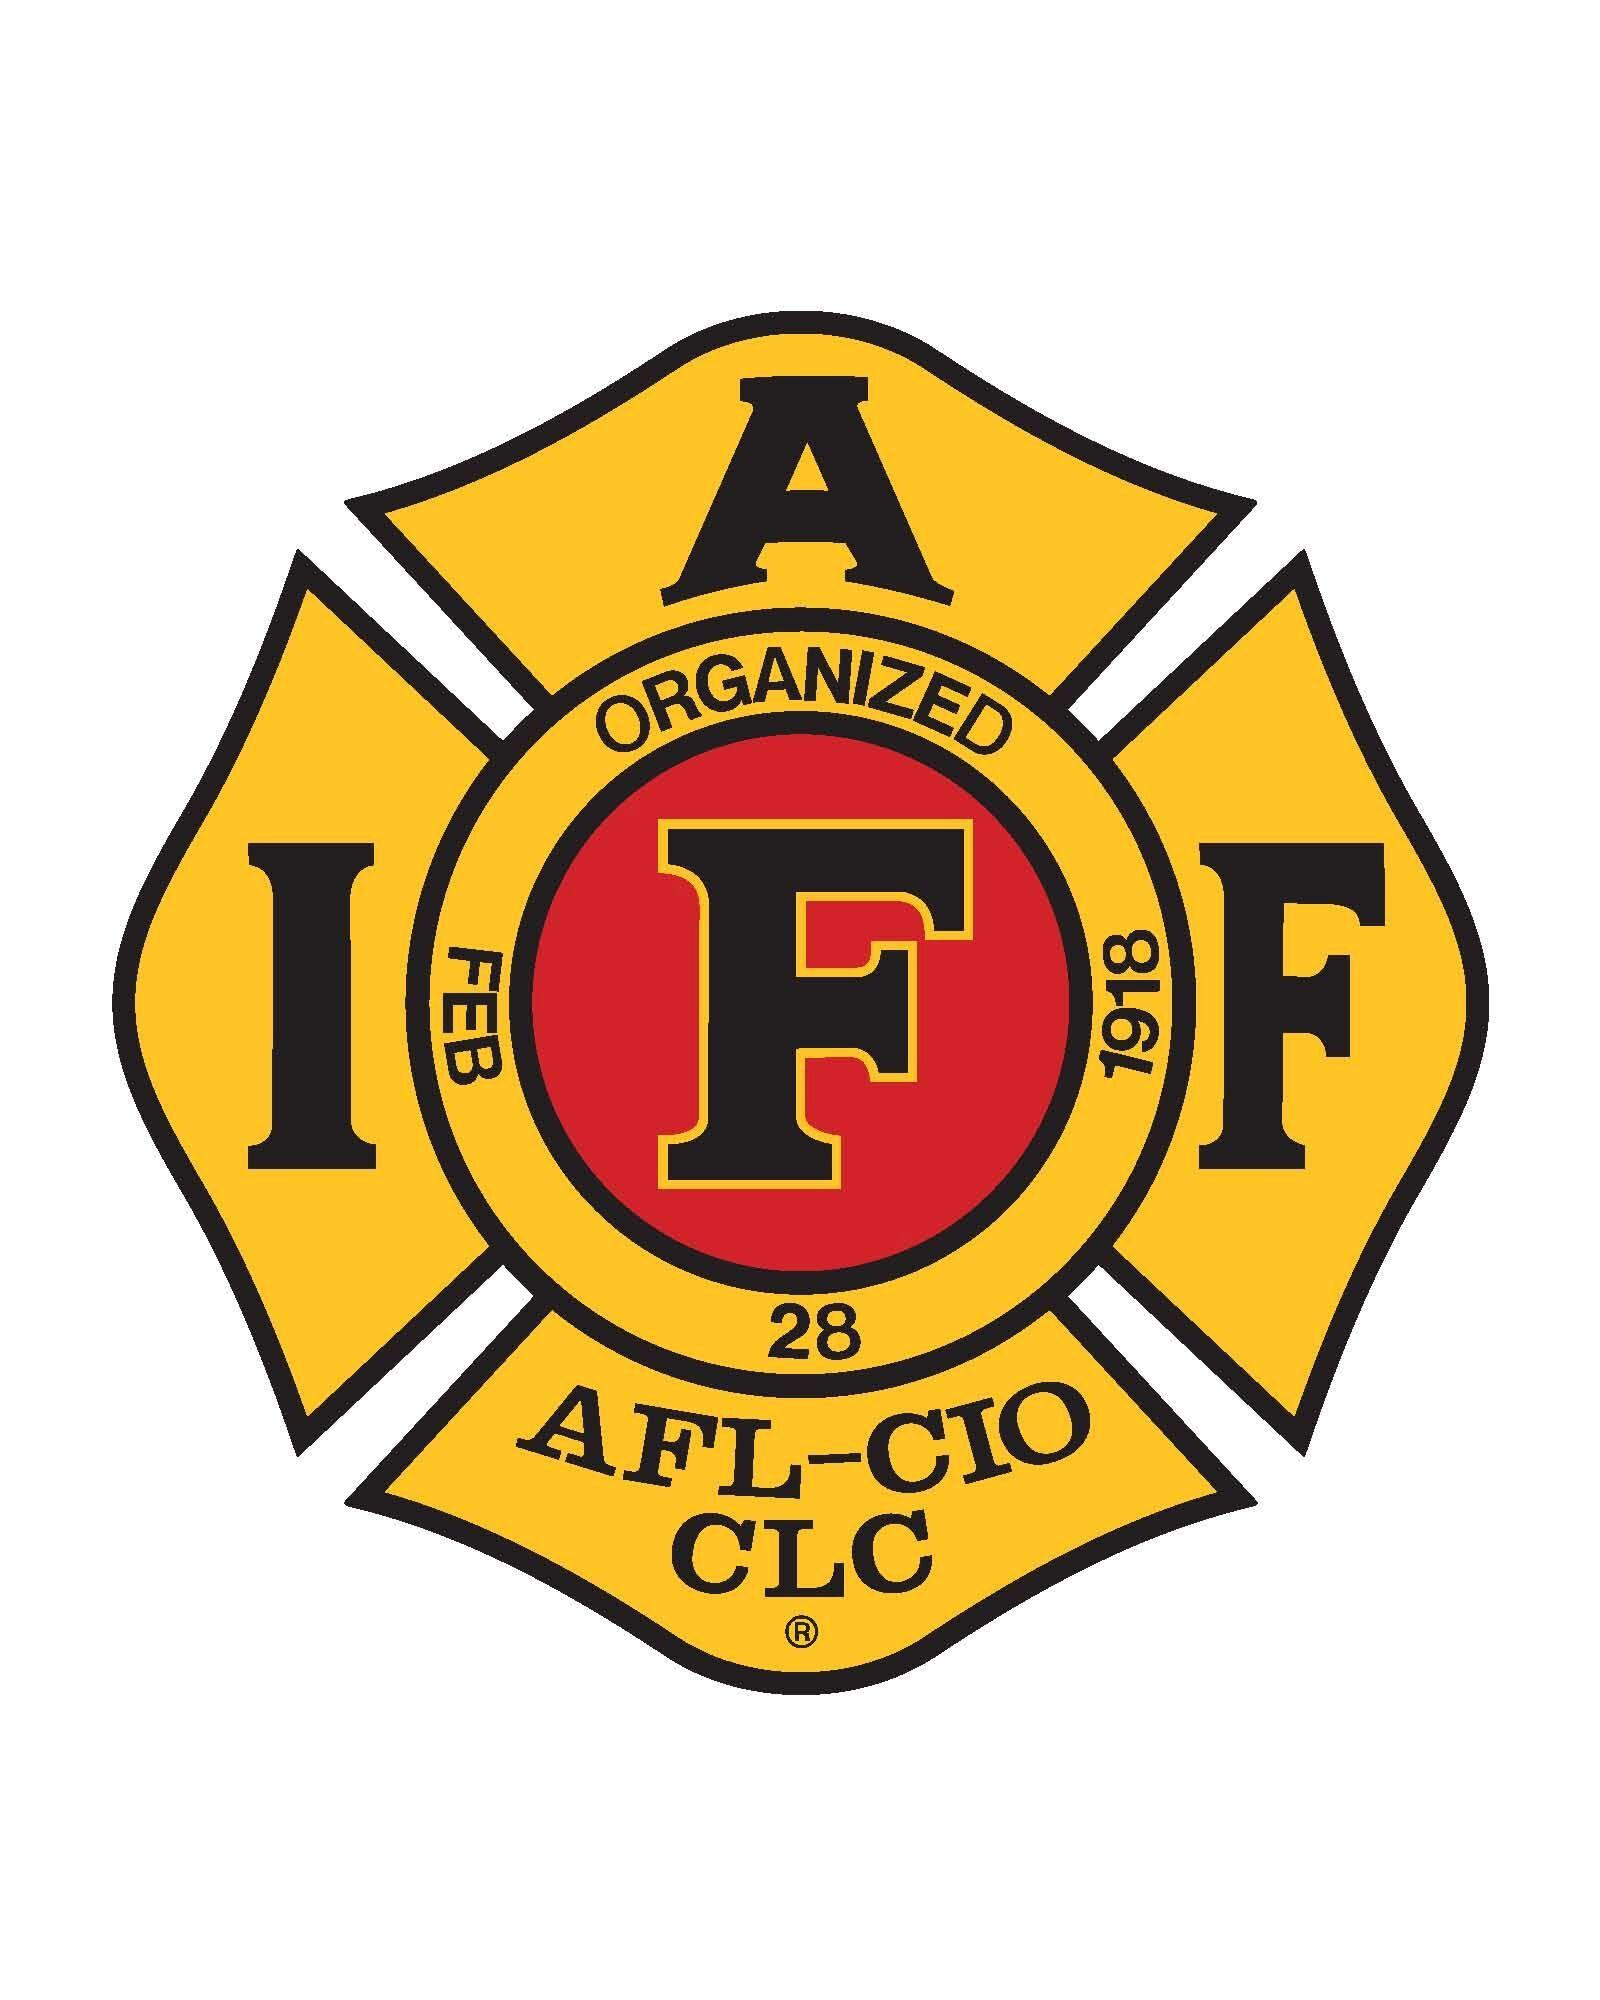 IAFF Logo - Pin by Empire Tactical on IAFF | Firefighter, Firefighter decals, Fire